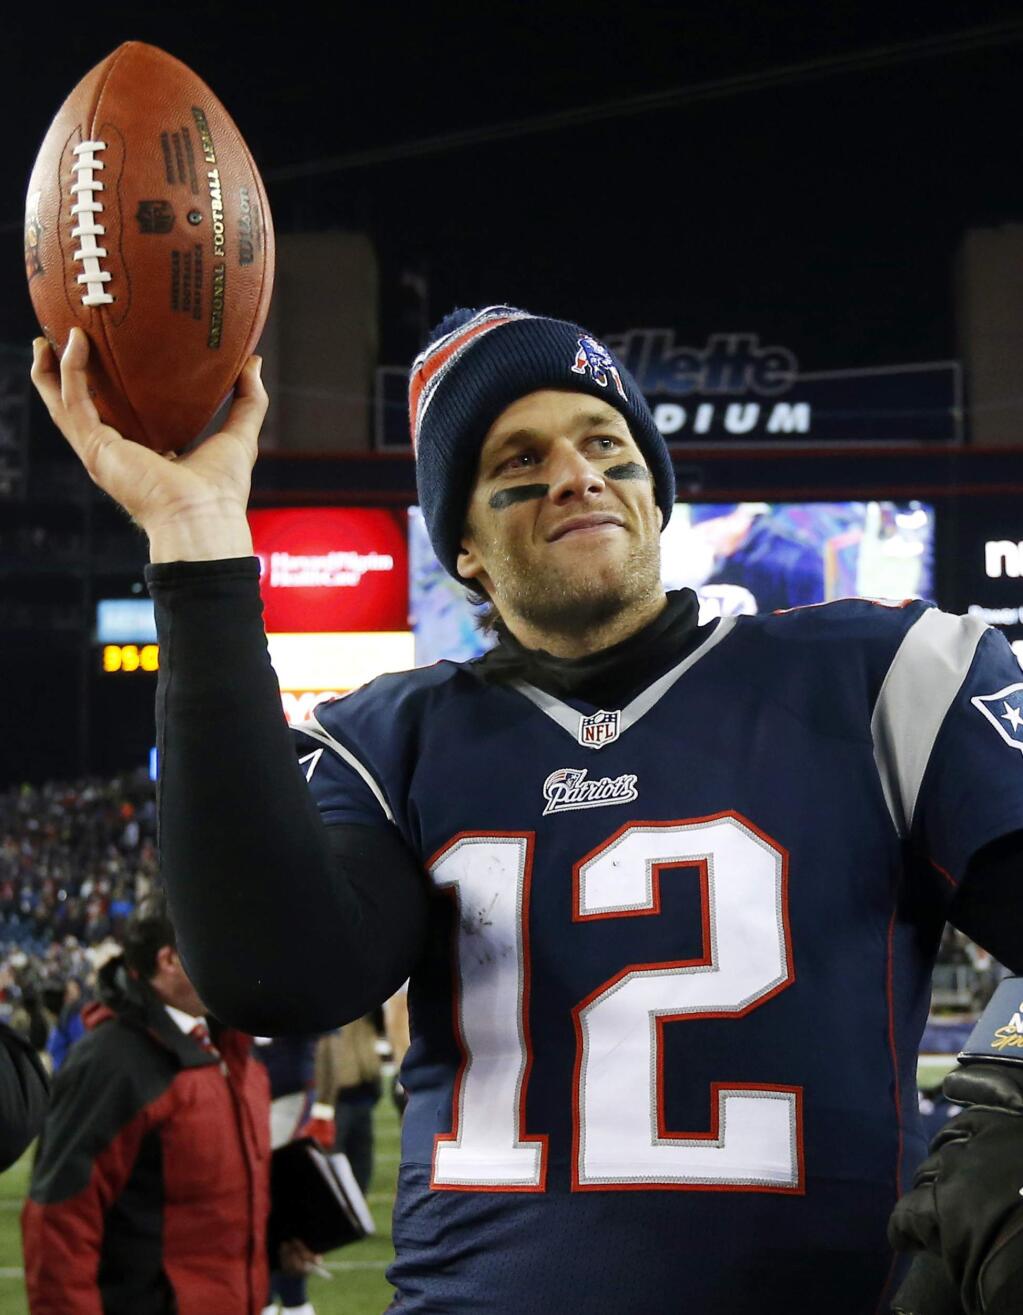 FILE - In this Jan. 10, 2015, file photo, New England Patriots quarterback Tom Brady holds up the game ball after an NFL divisional playoff football game against the Baltimore Ravens in Foxborough, Mass. A federal appeals court has ruled, Monday, April 25, 2016, that New England Patriots Tom Brady must serve a four-game 'Deflategate' suspension imposed by the NFL, overturning a lower judge and siding with the league in a battle with the players union. (AP Photo/Elise Amendola, File)